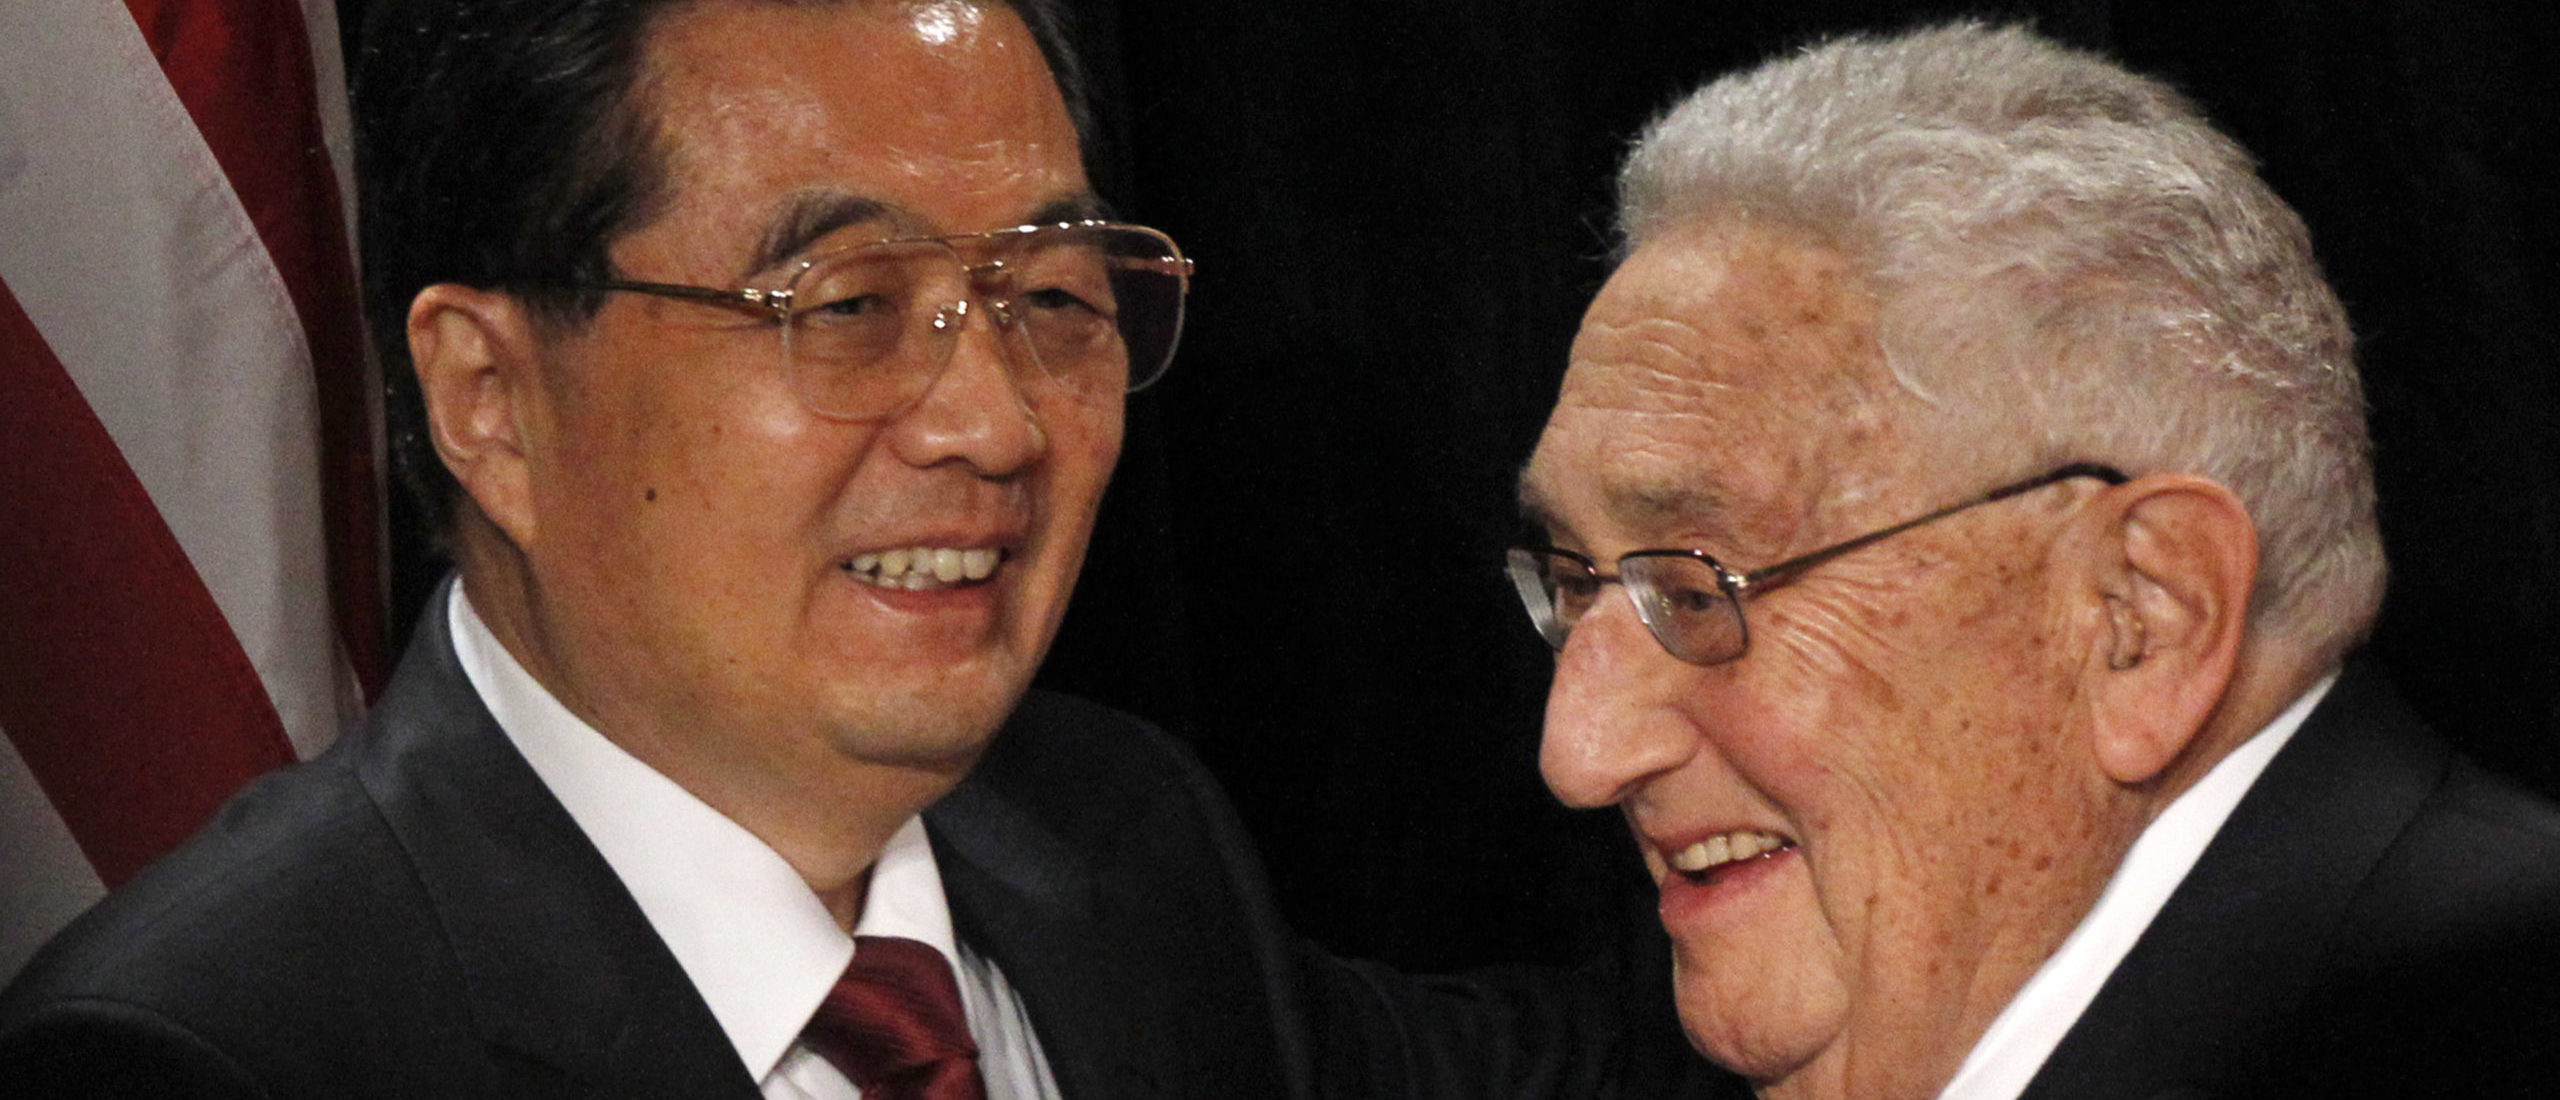 Former General Secretary of China Hu Jintao (L) is introduced by former U.S. Secretary of State Henry Kissinger before addressing the U.S.-China Business Council in Washington, January 20, 2011. (REUTERS/Jim Young)